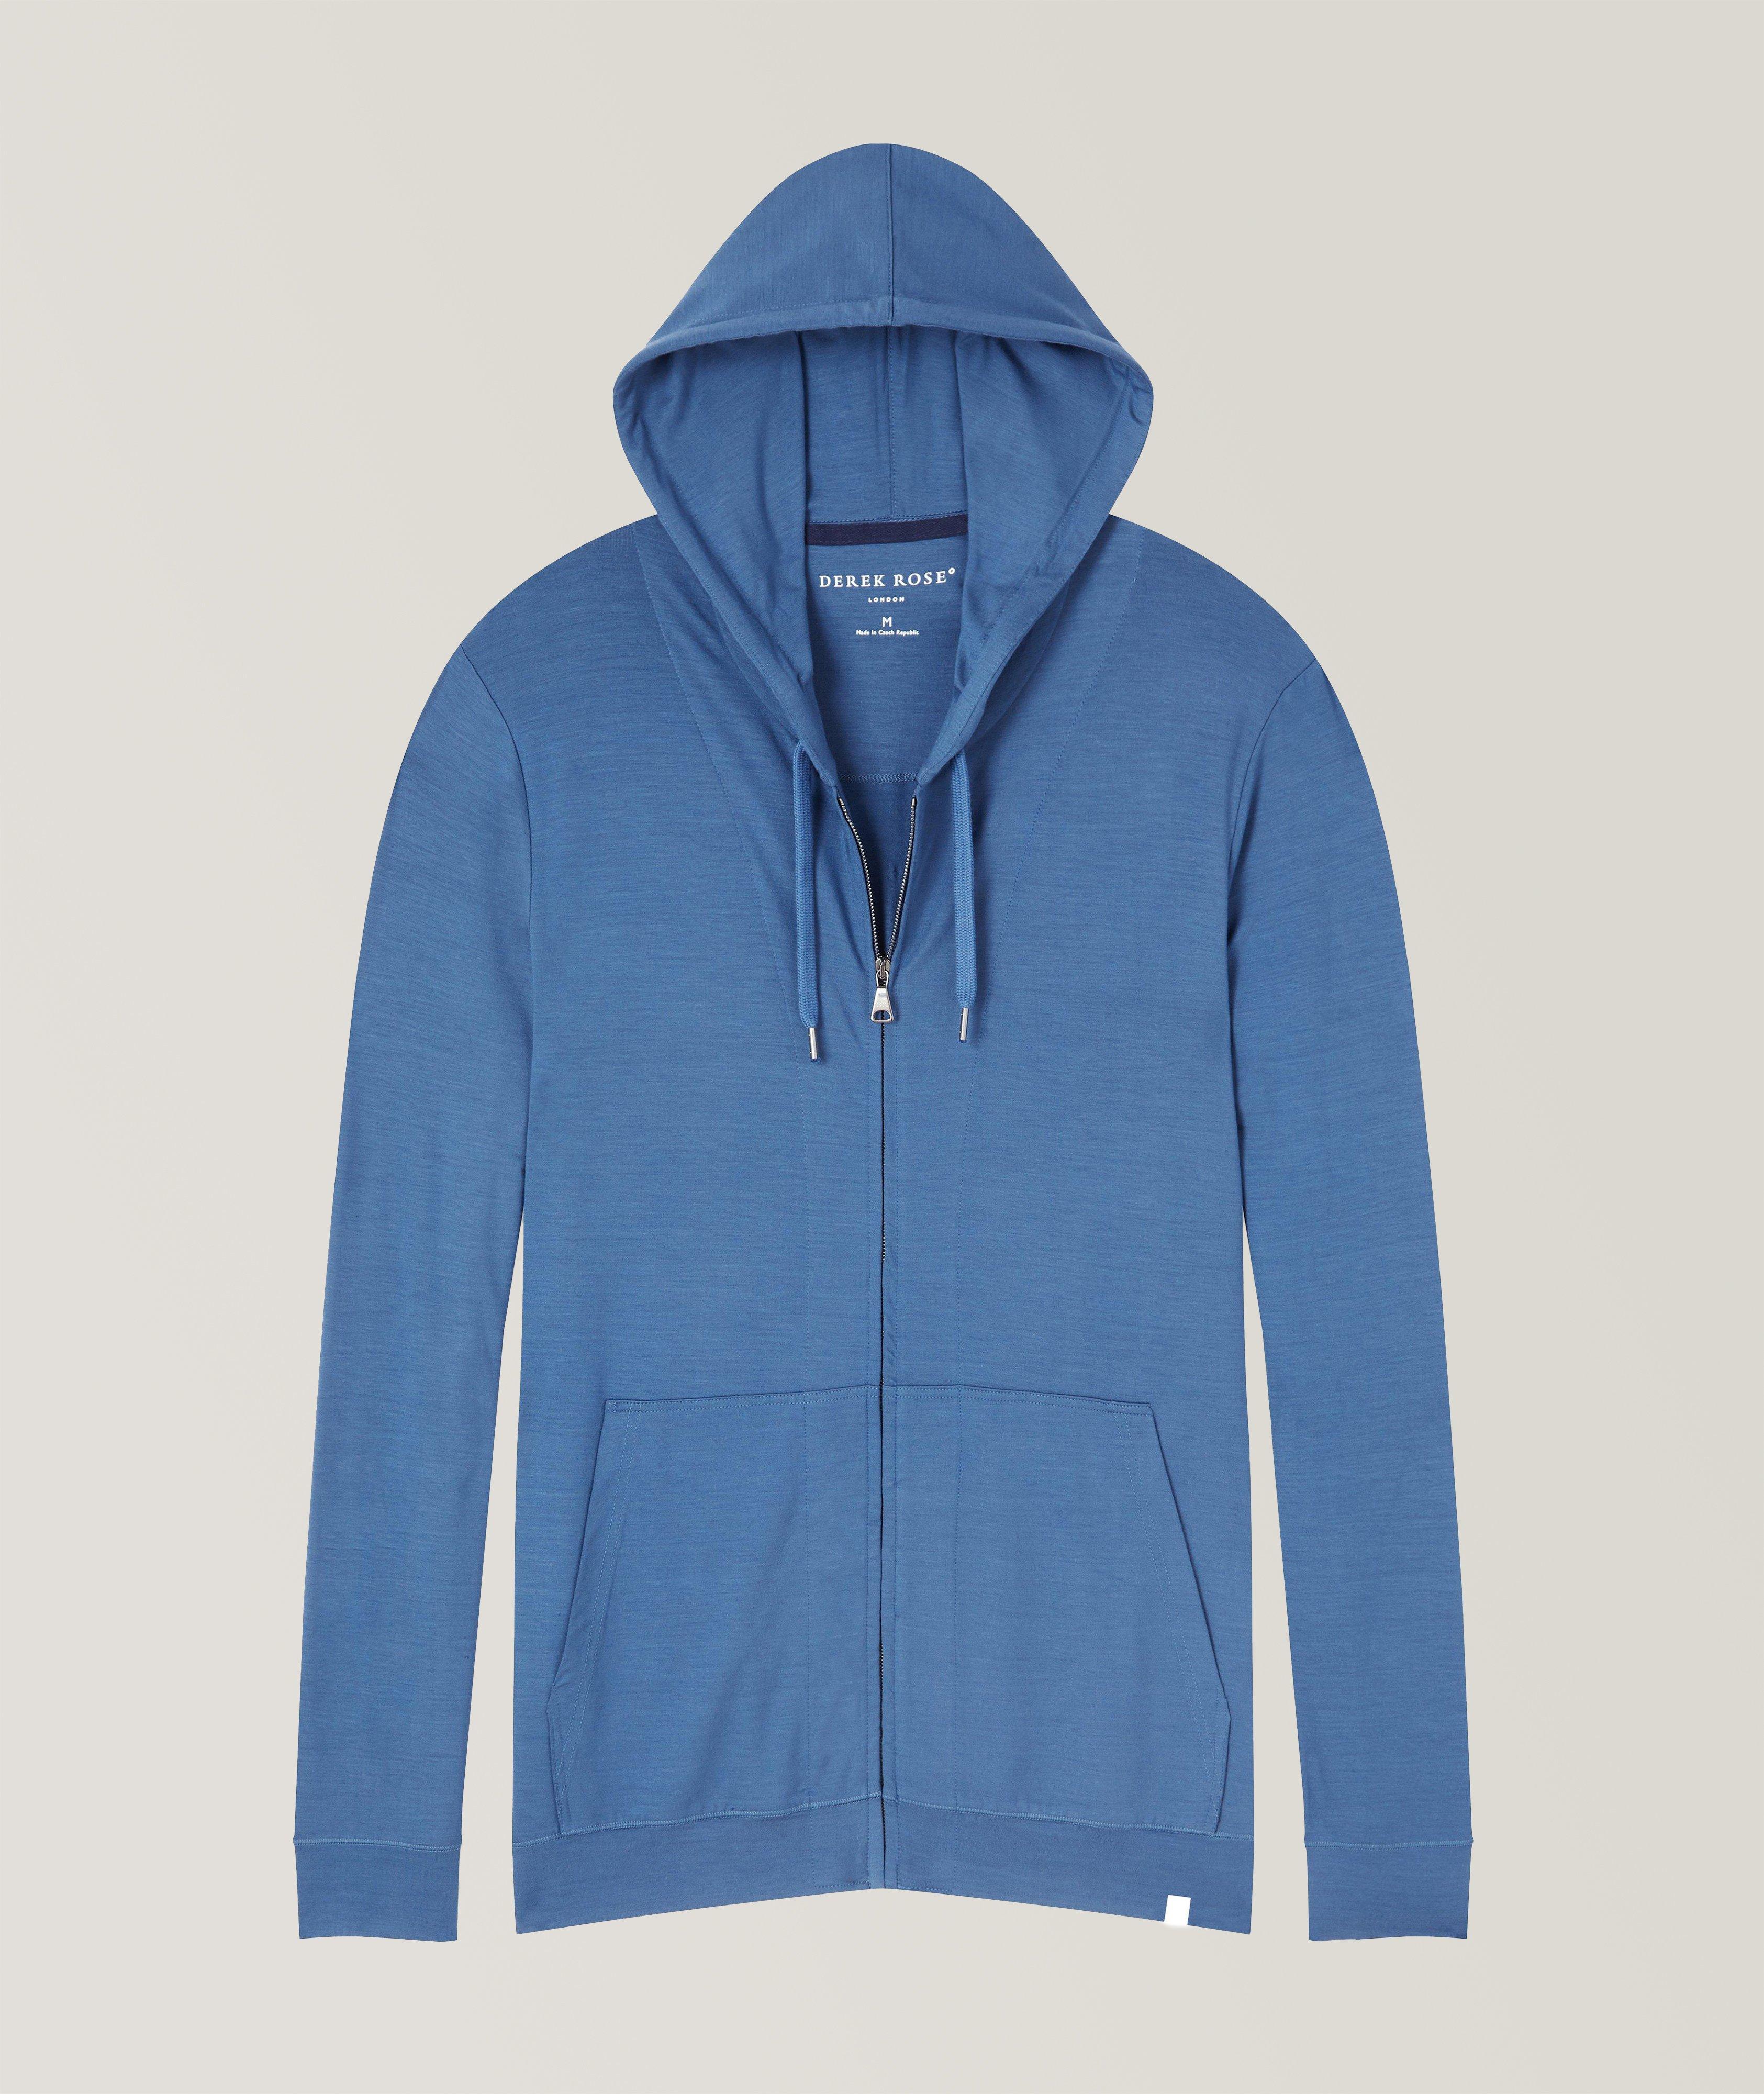 Basel 13 Micro-Modal Stretch Hooded Sweater